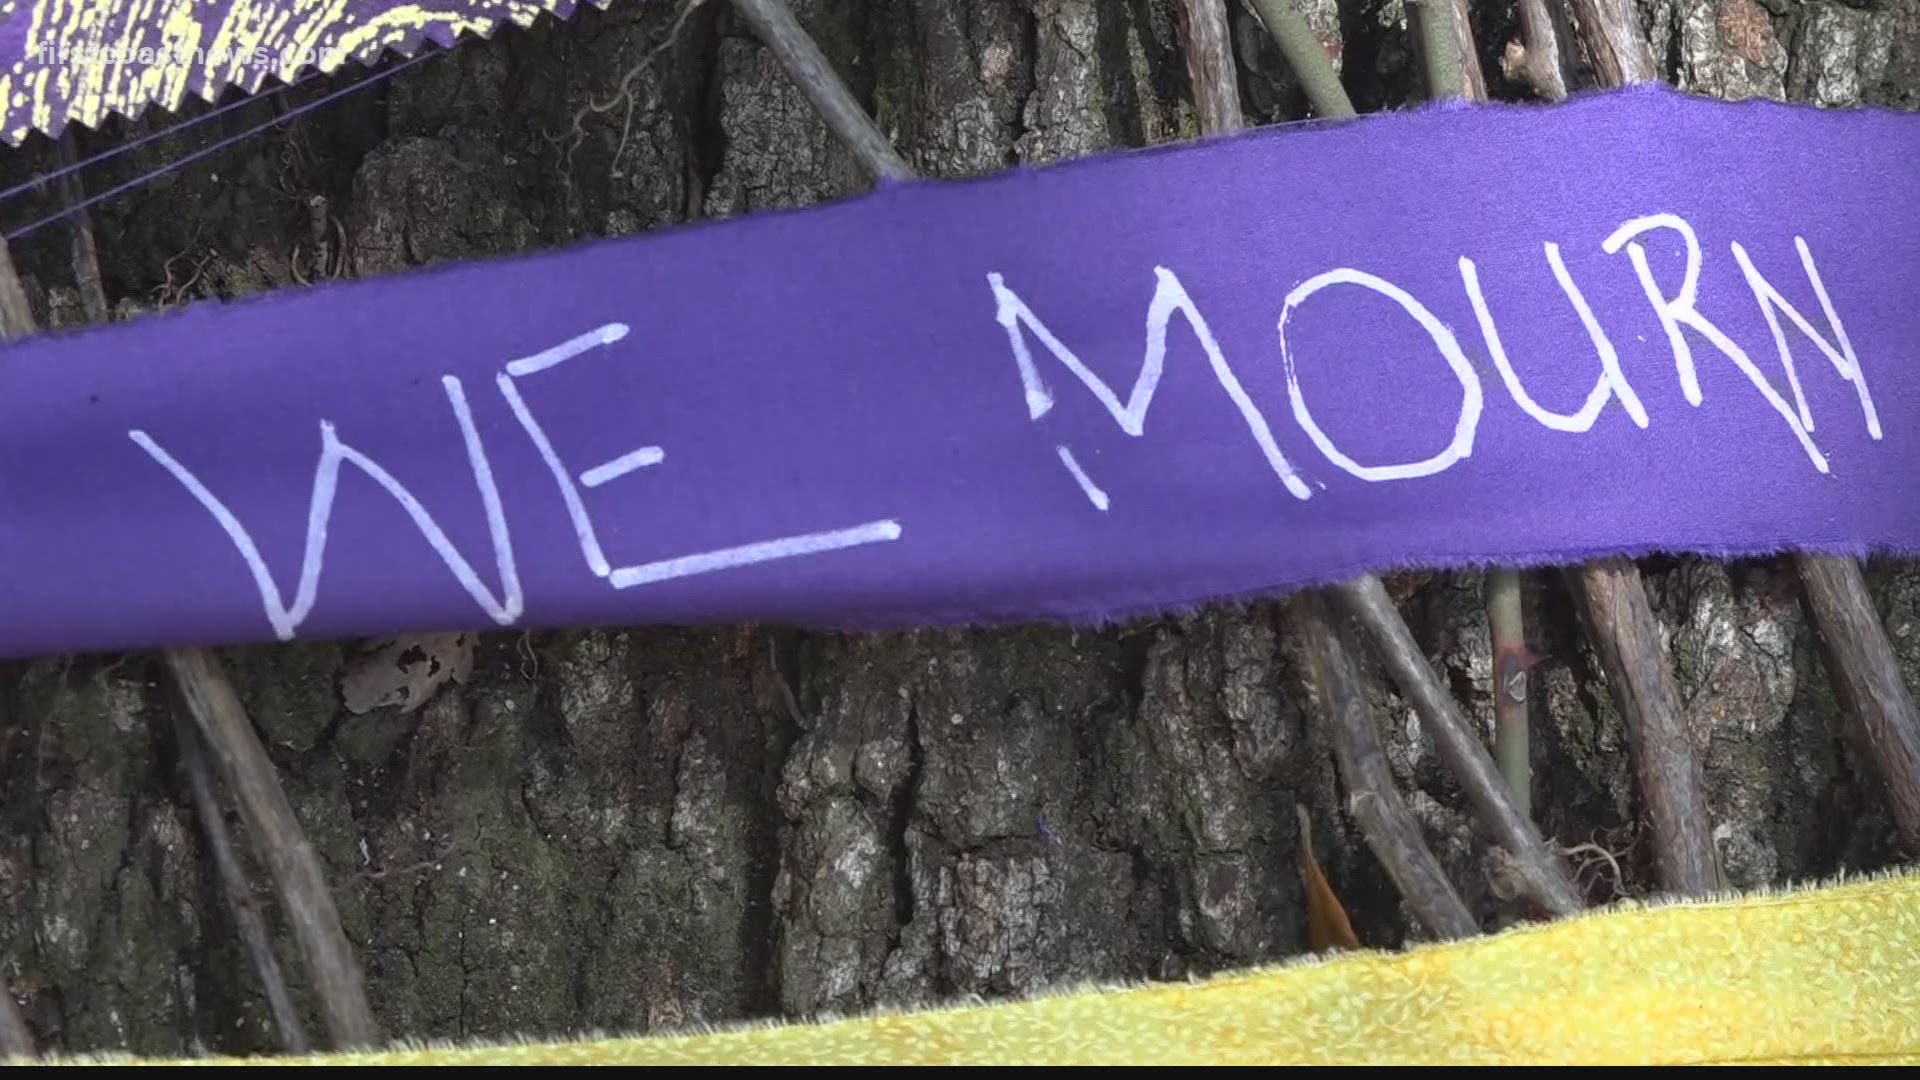 Blooming hope: Community Tree project in Jacksonville lets people share messages of love, loss